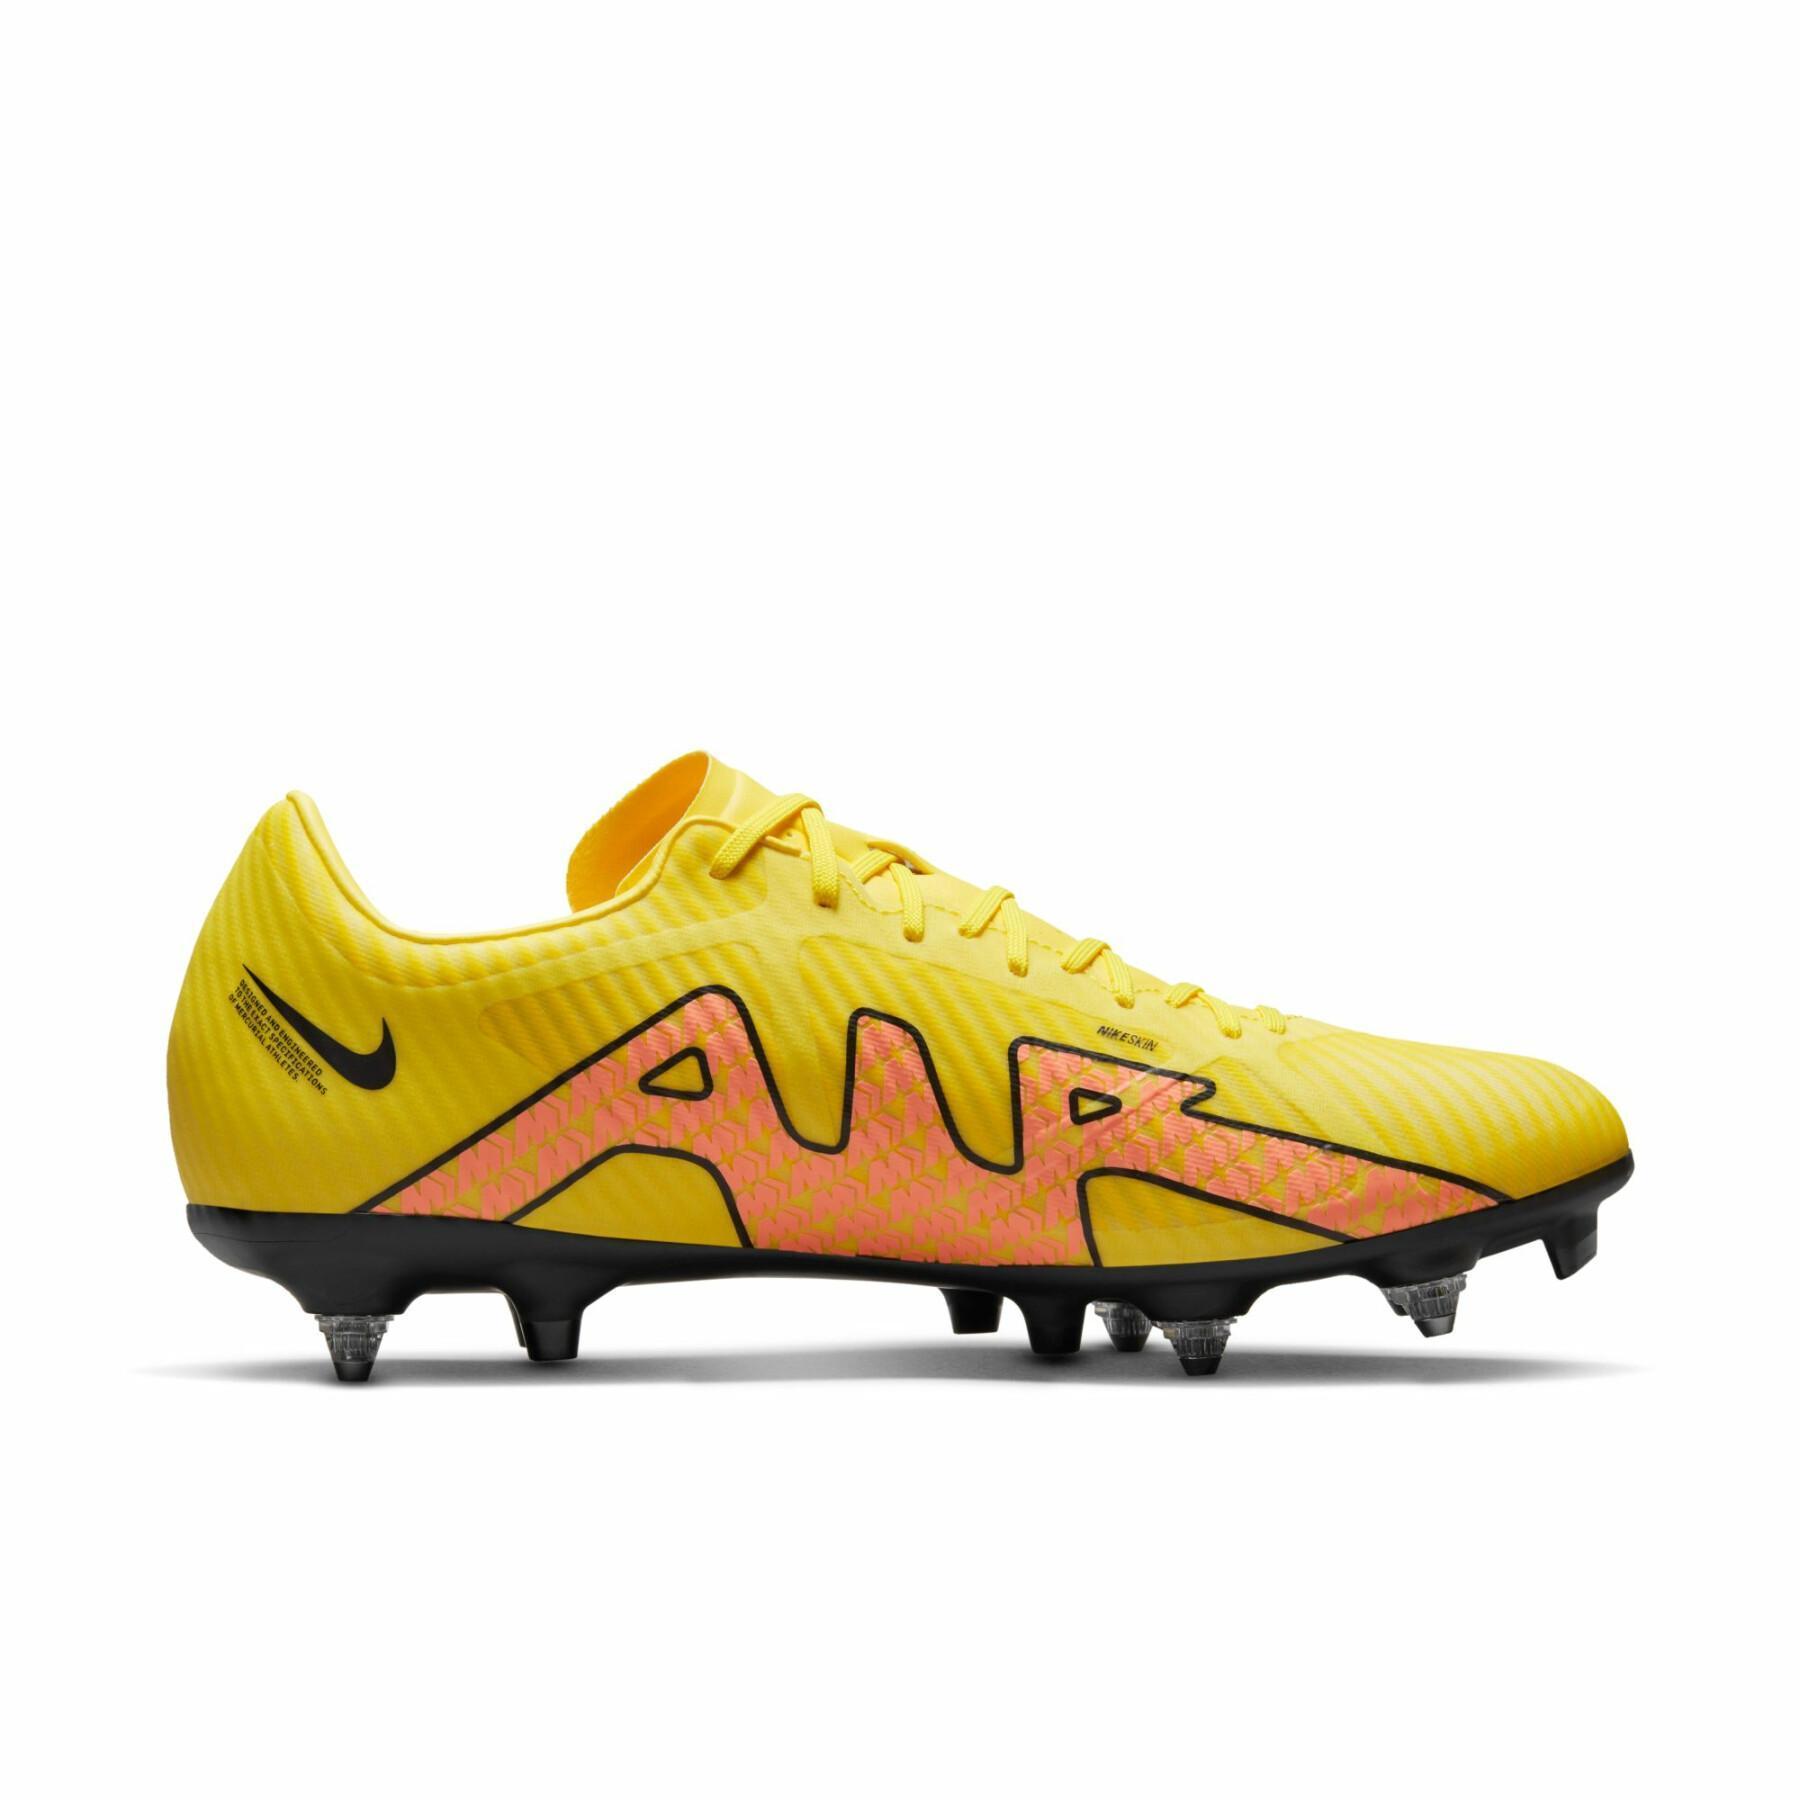 Soccer shoes Nike Zoom Mercurial Vapor 15 Academy SG-Pro - Lucent Pack